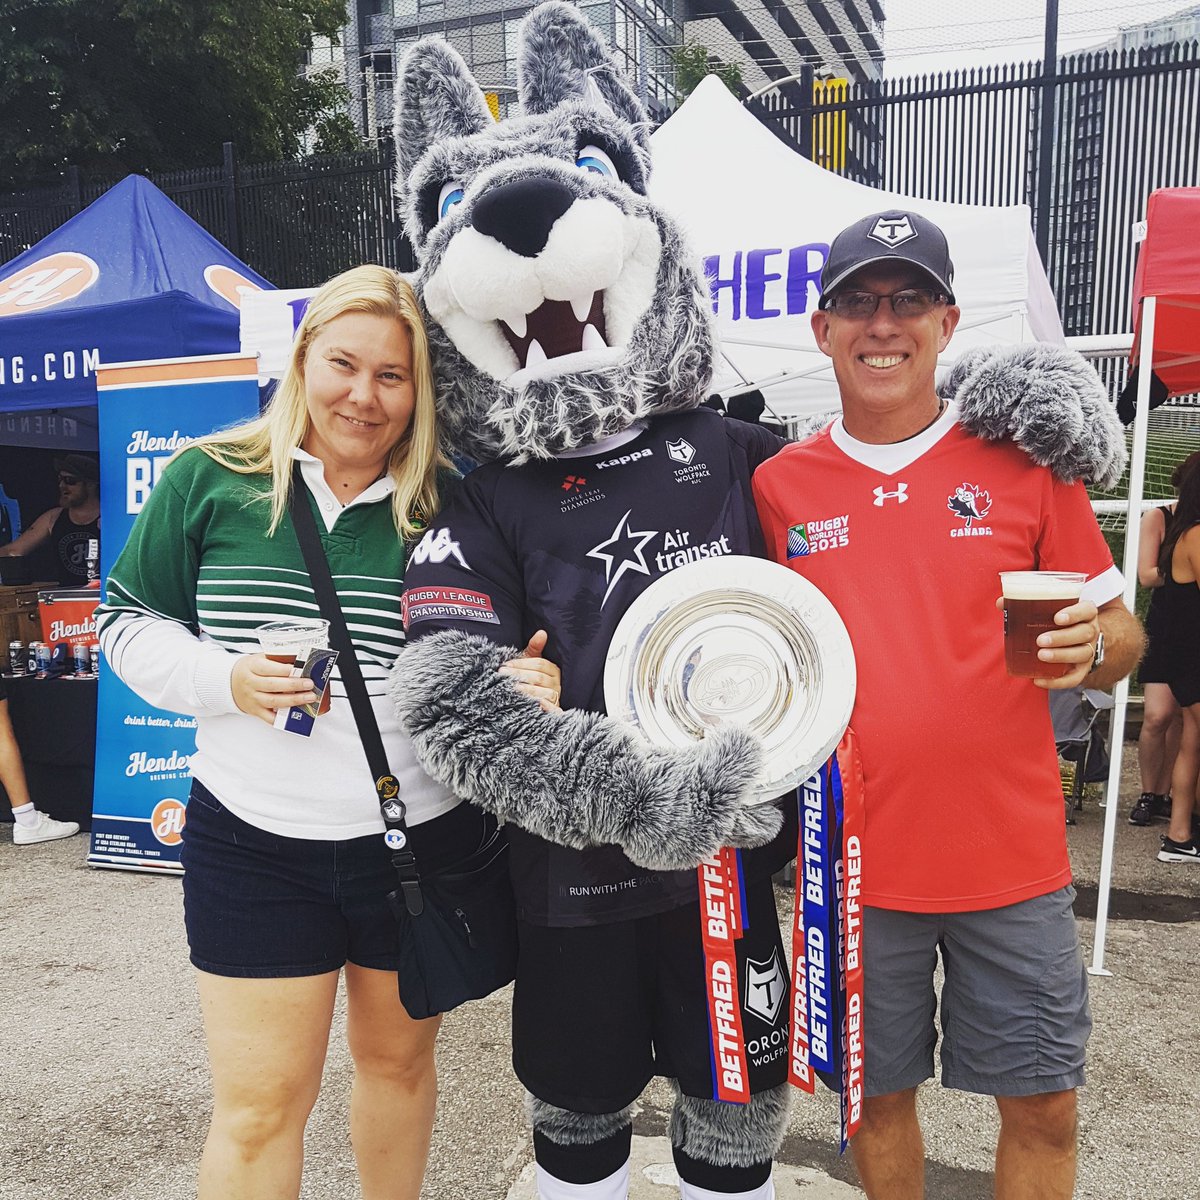 League Leaders Shield available for photo ops in the beer garden today at the Toronto Wolfpack match. Thanks Jefferson for showing us the prize! 
#TorontoWolfpack #DefendTheDen #RunWithThePack #WinWithThePack #LeagueLeaders #LeagueLeadersShield #betfredchampionship  ❤🐺❤